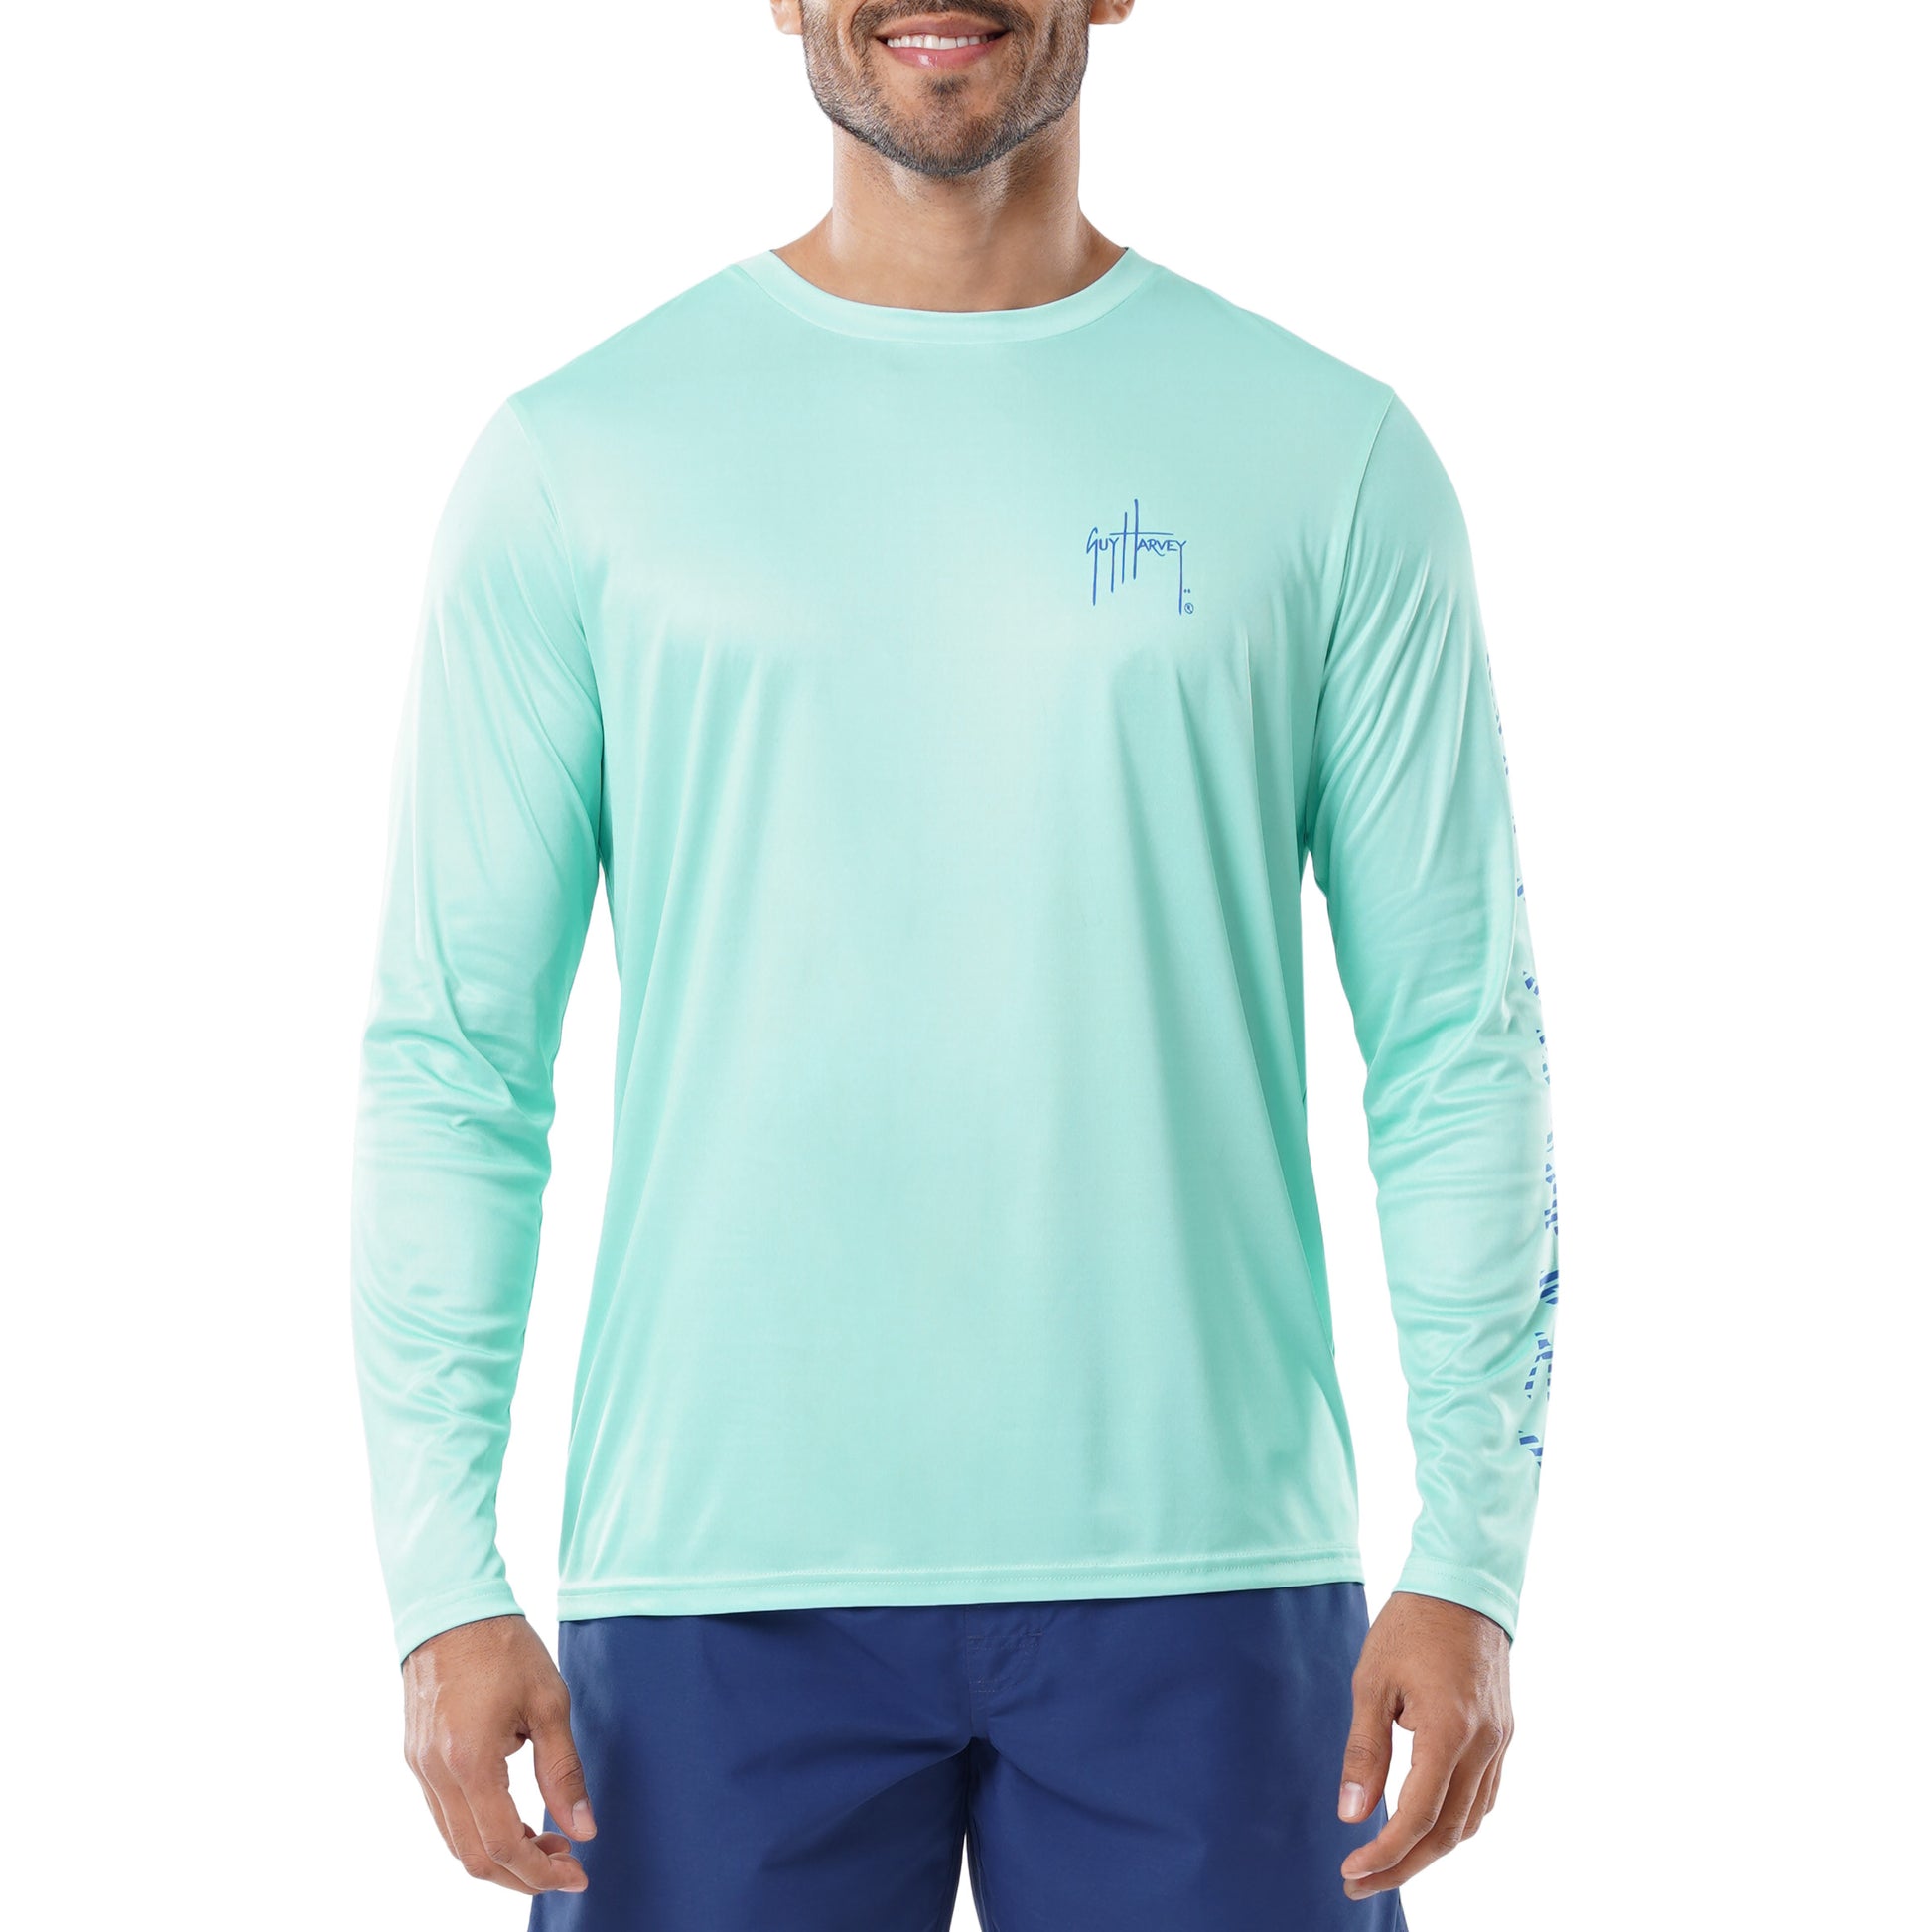 Men's Offshore Fishing Performance Sun Protection Top View 2